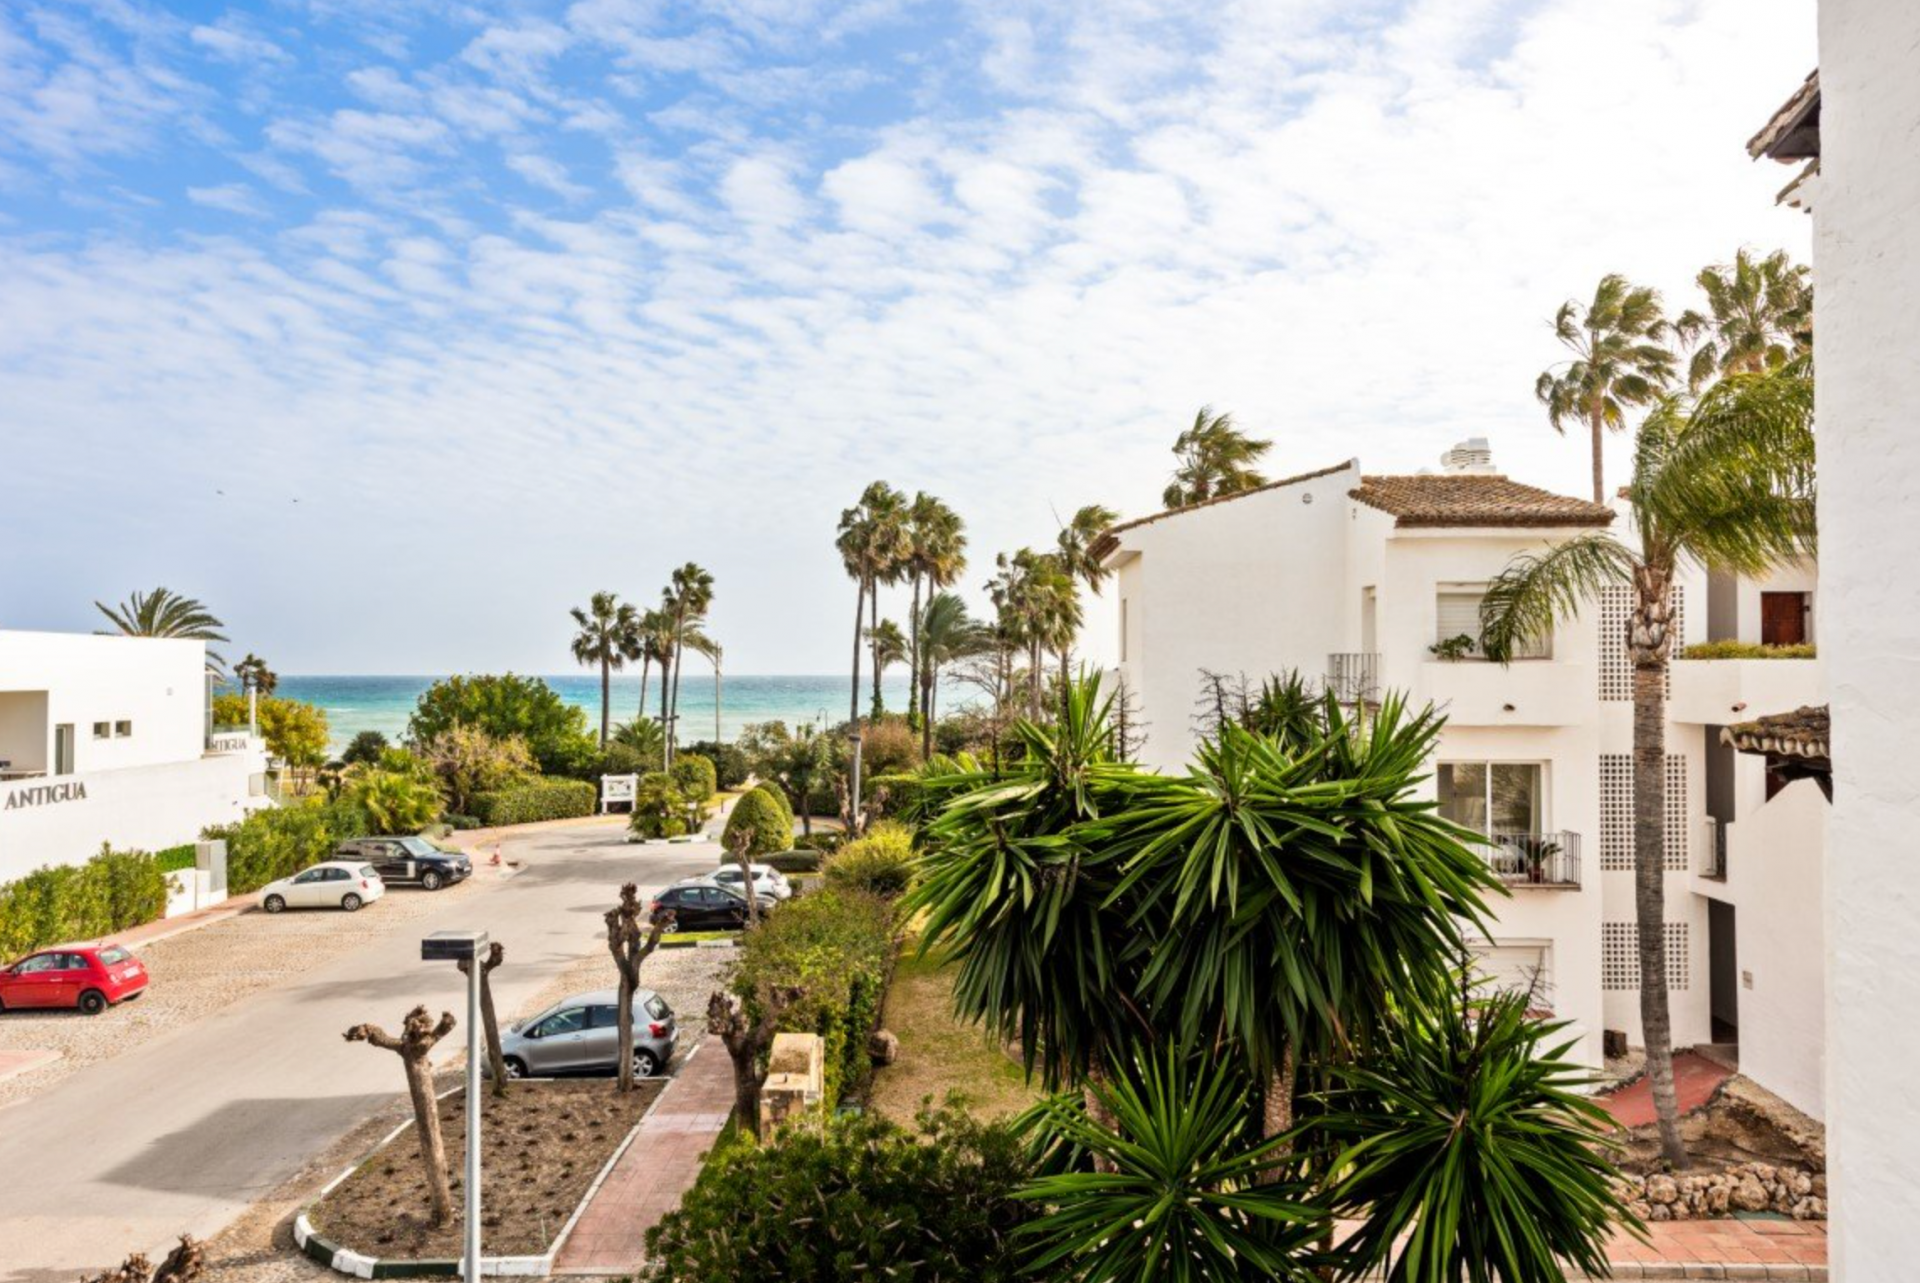 Wonderful penthouse with sea views set in the private complex of Costalita next to the beach